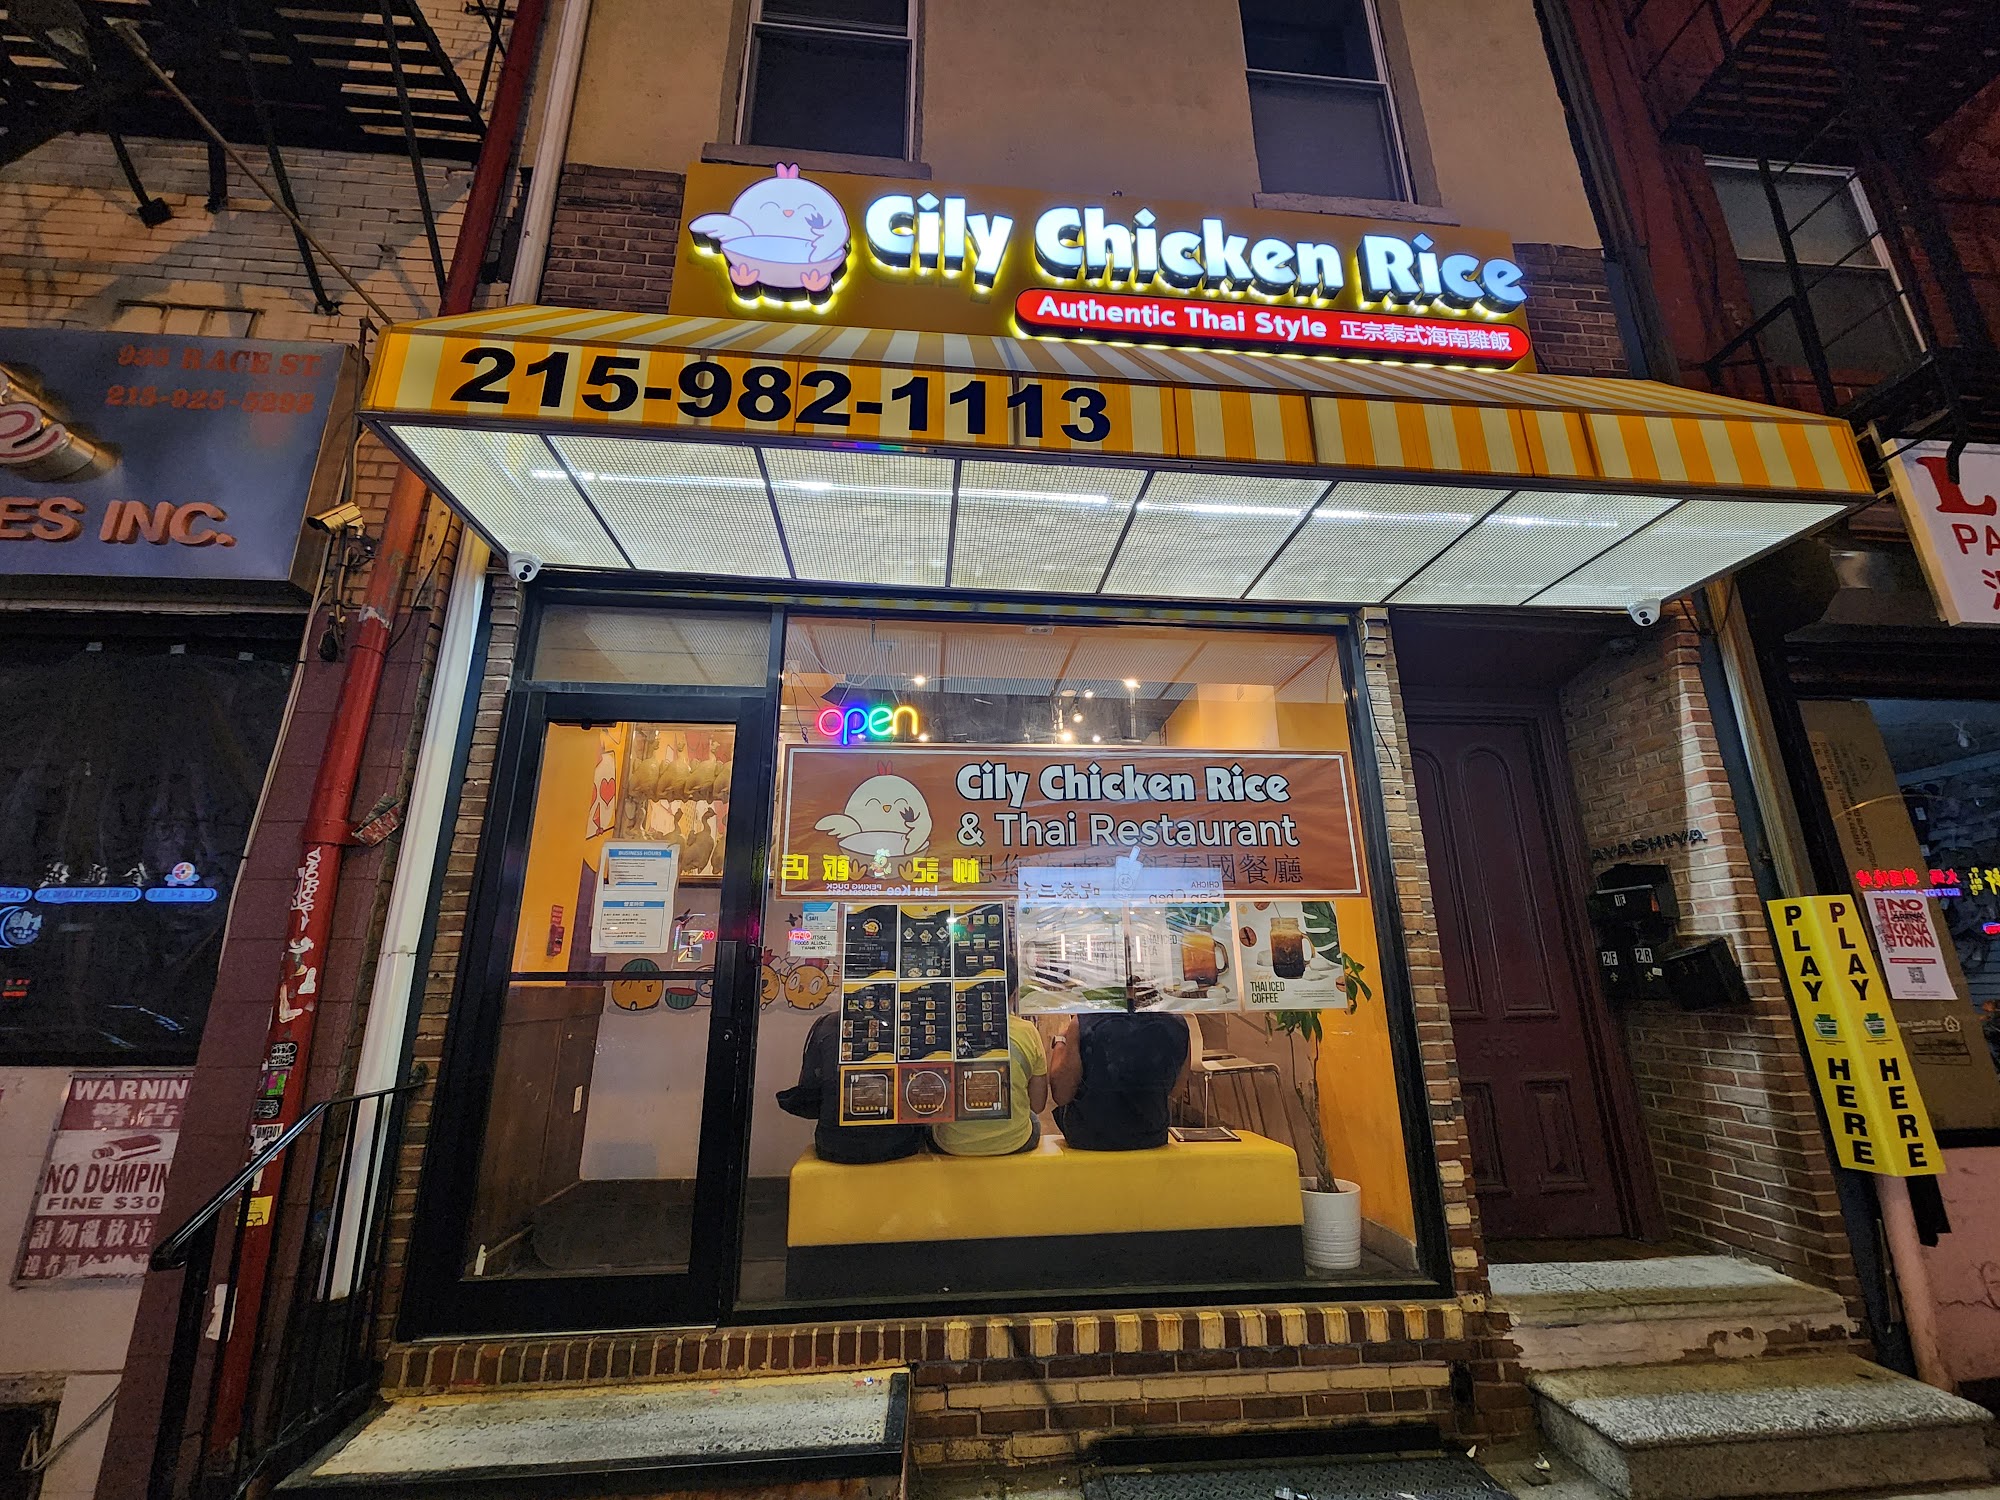 Cily Chicken Rice and Thai food